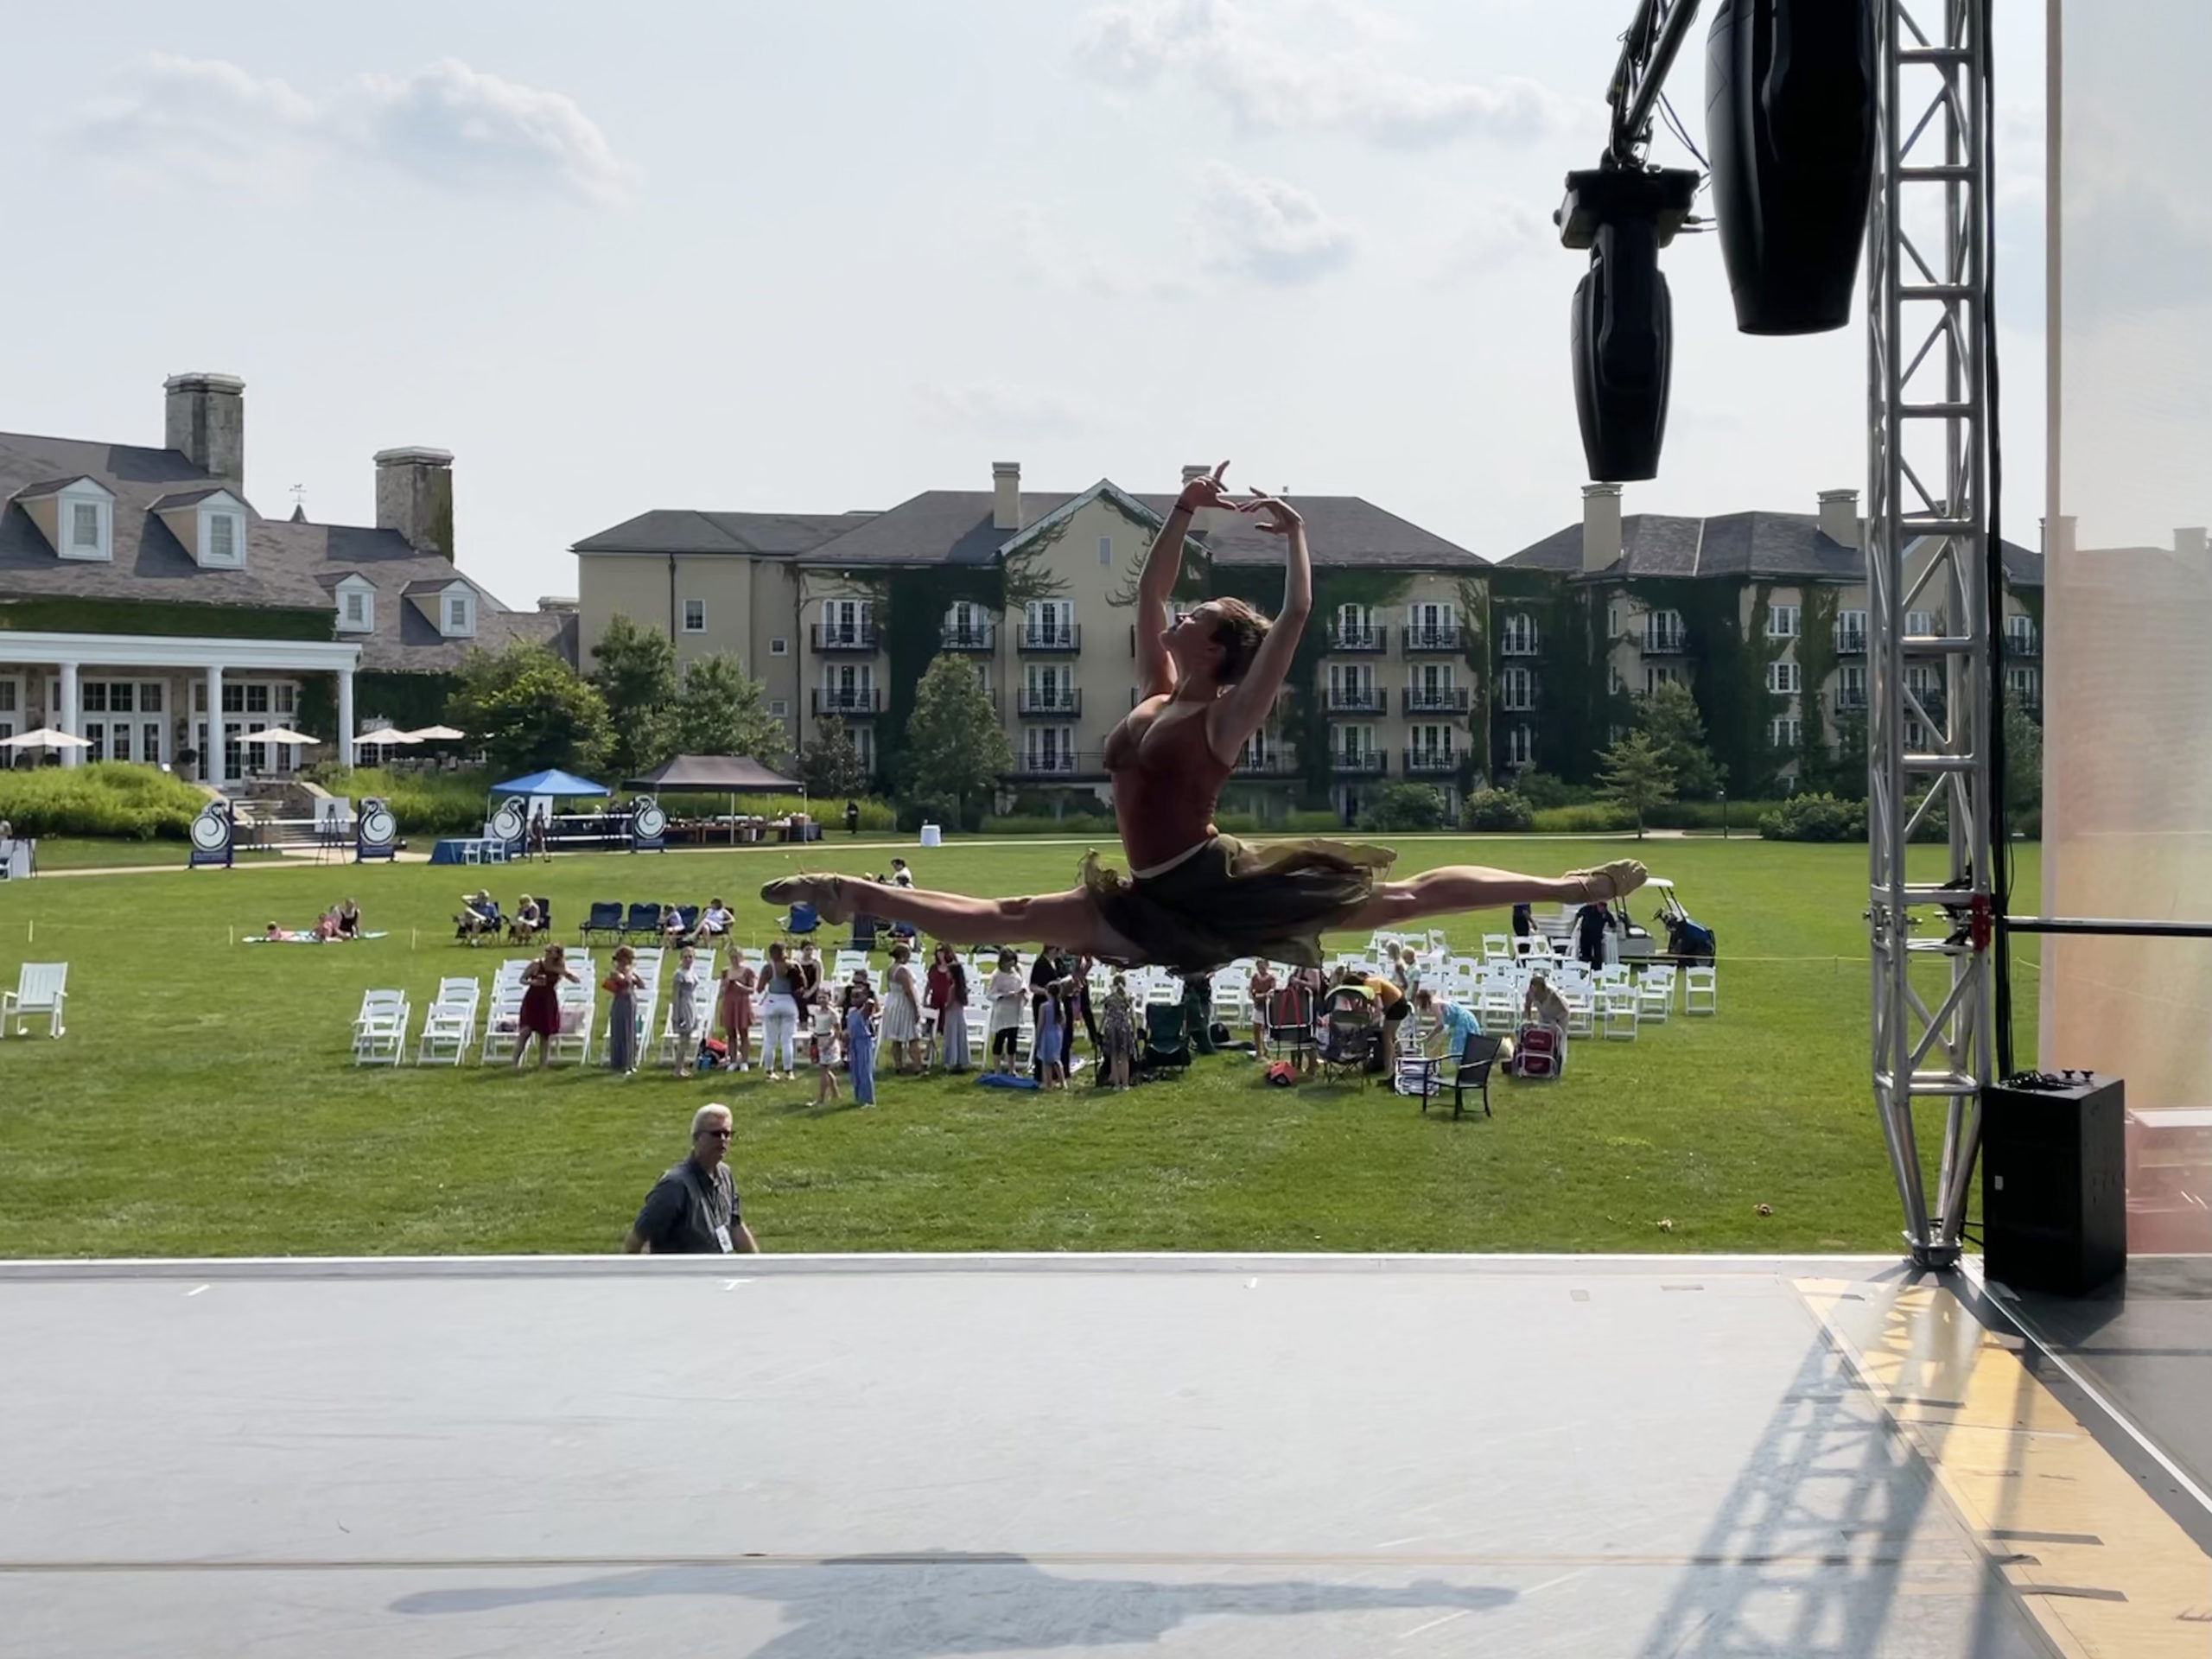 Abbey Marrison, wearing a brown leotard, black skirt and ballet slippers, does a saut de chat on an outdoor stage. A green lawn with white chairs and people milling about, as well as a large hotel complex, are in the background.